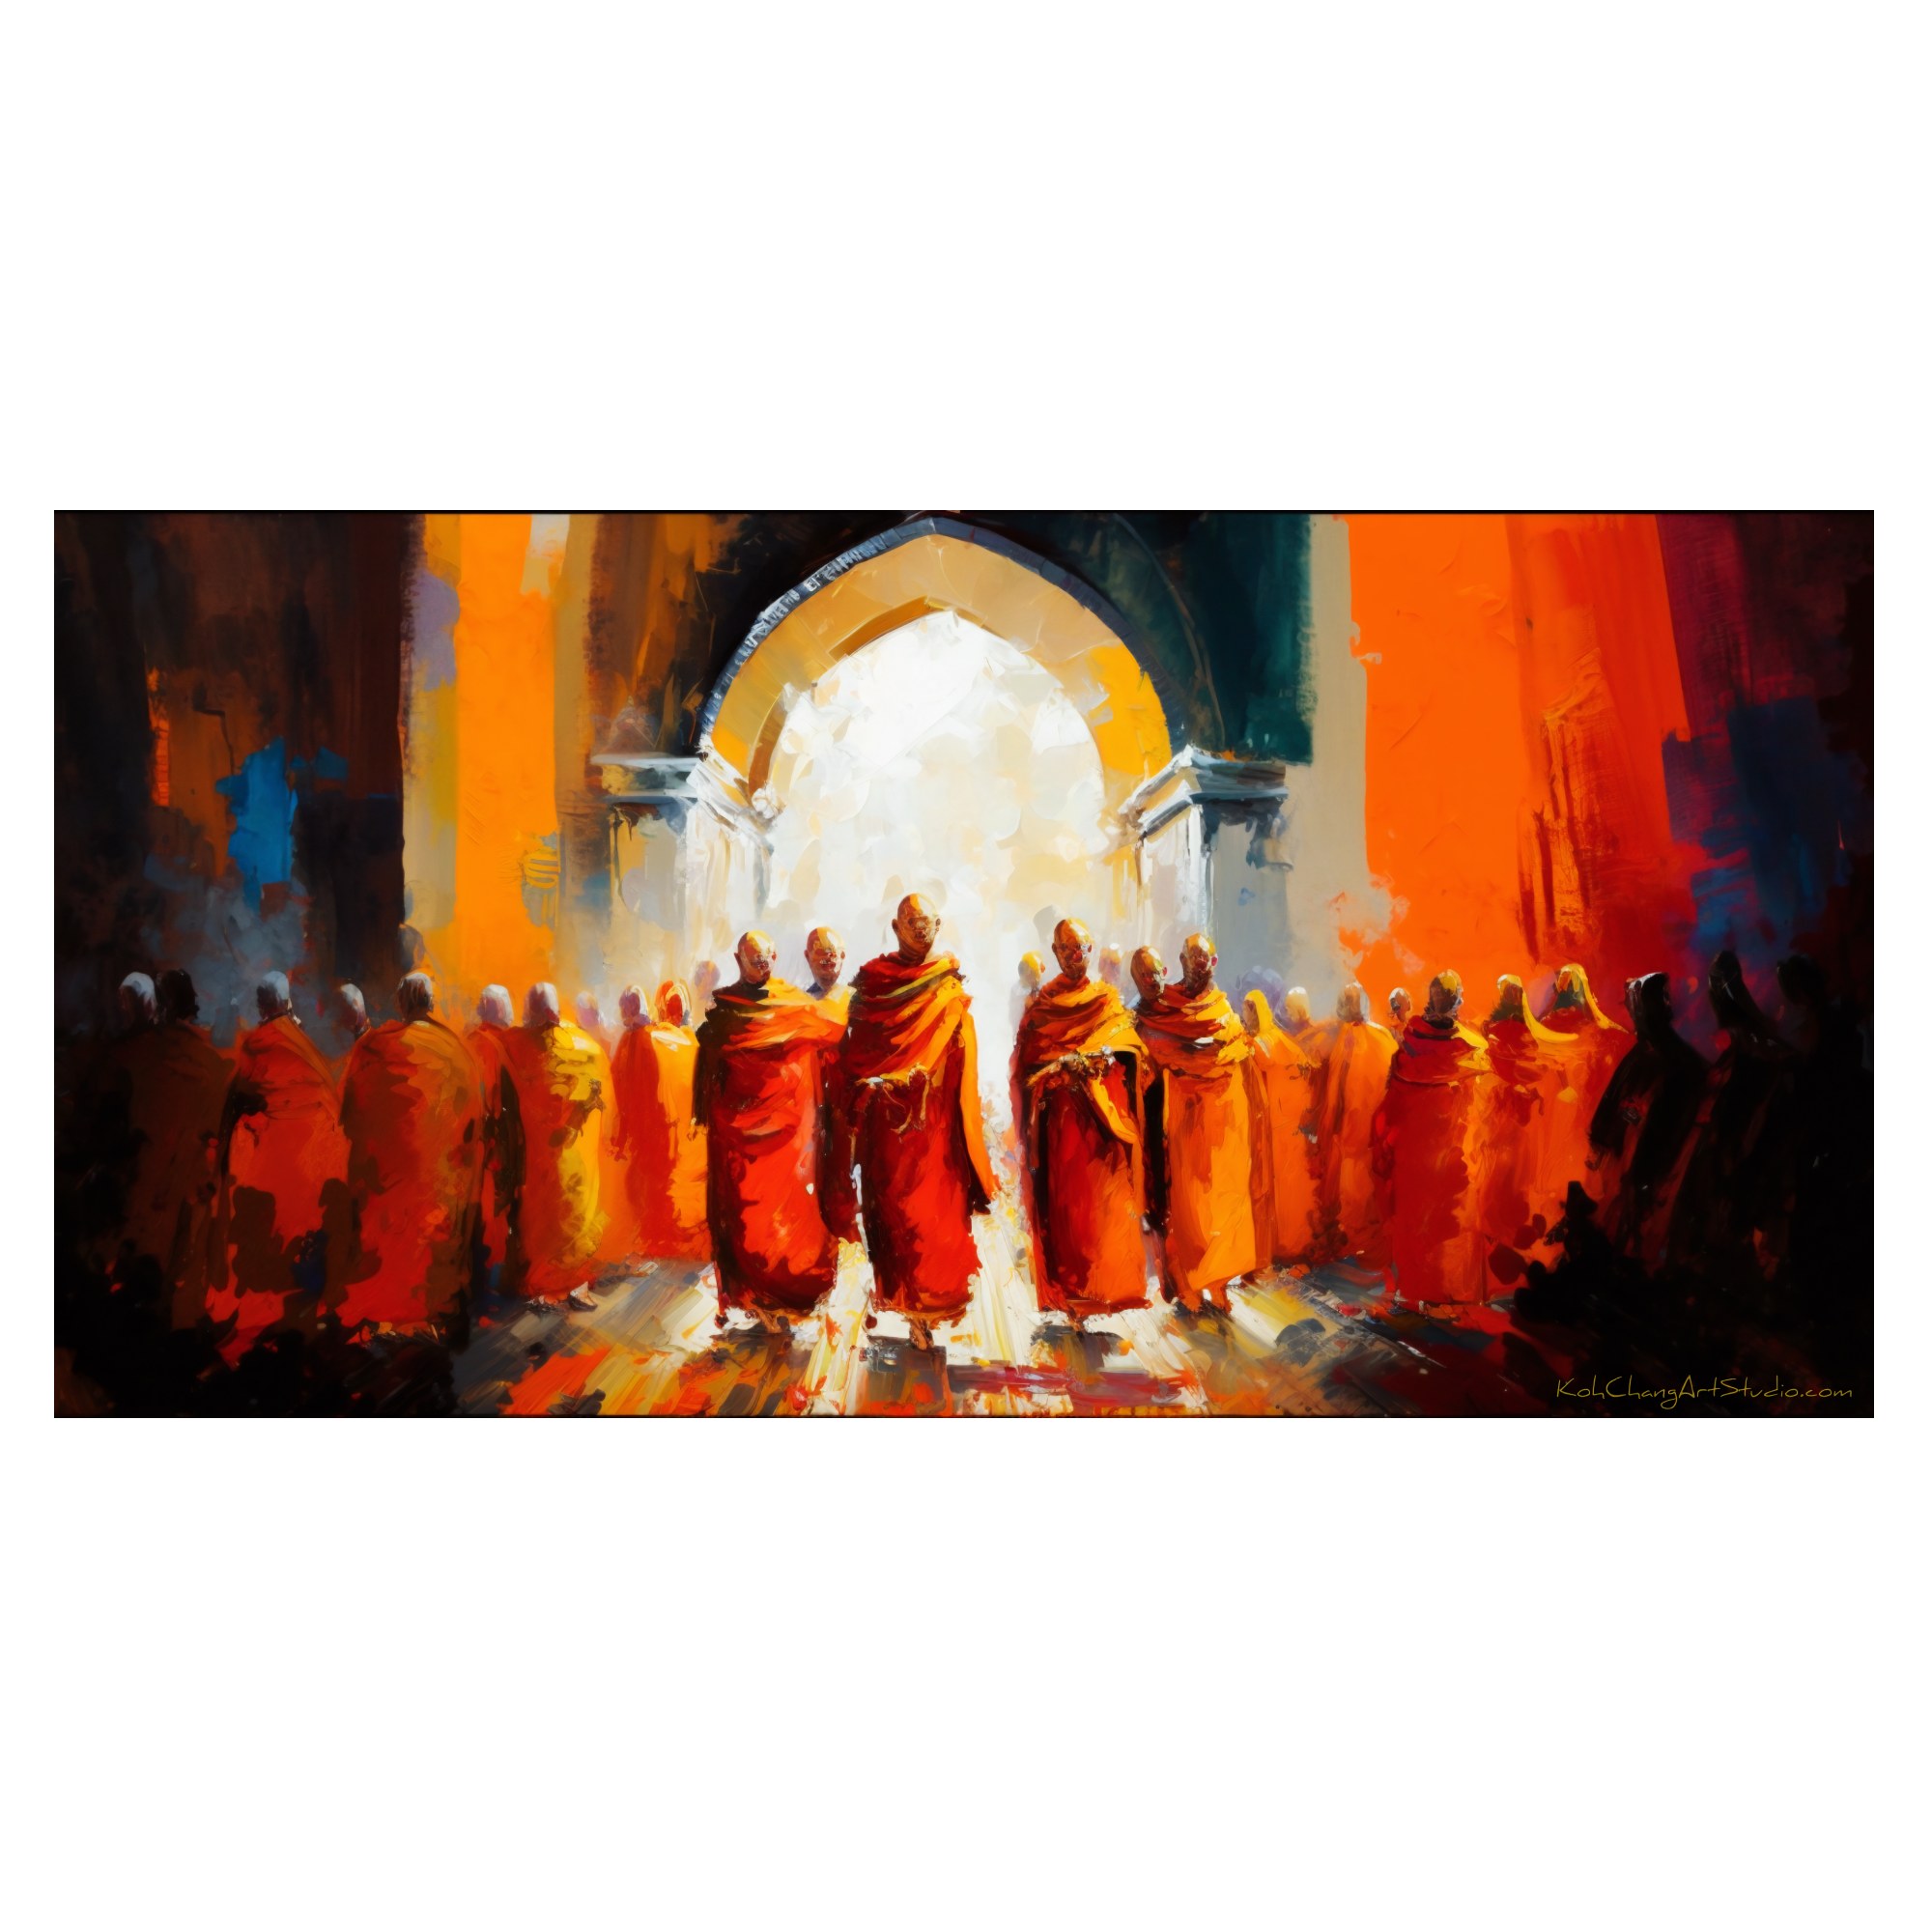 KARMA CROSSING Image - Monks in transition, evoking the essence of Buddhist teachings.